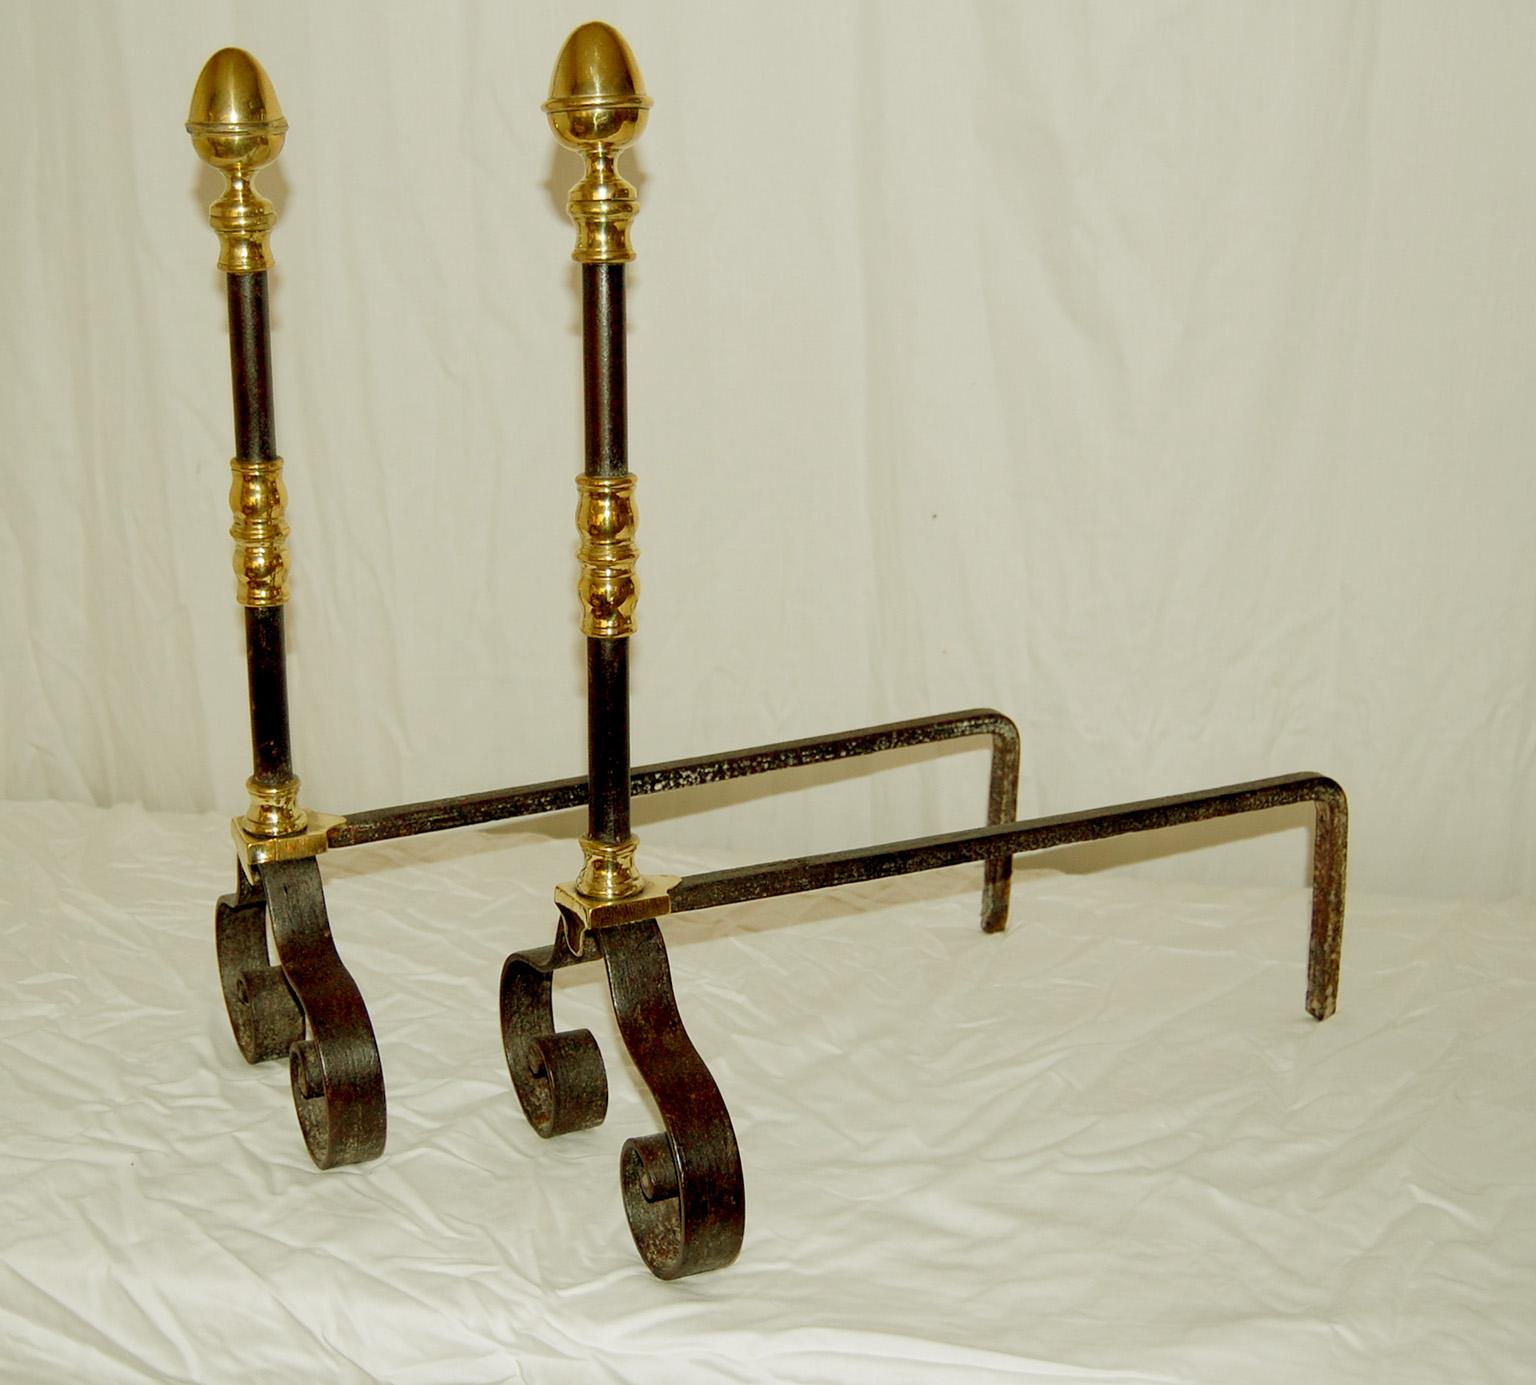  English wrought iron and brass Georgian andirons with swirl feet and acorn finials.  This combination of iron and brass is often used in sophisticated but less formal settings, the swirl feet add stability and create a lovely pattern against the